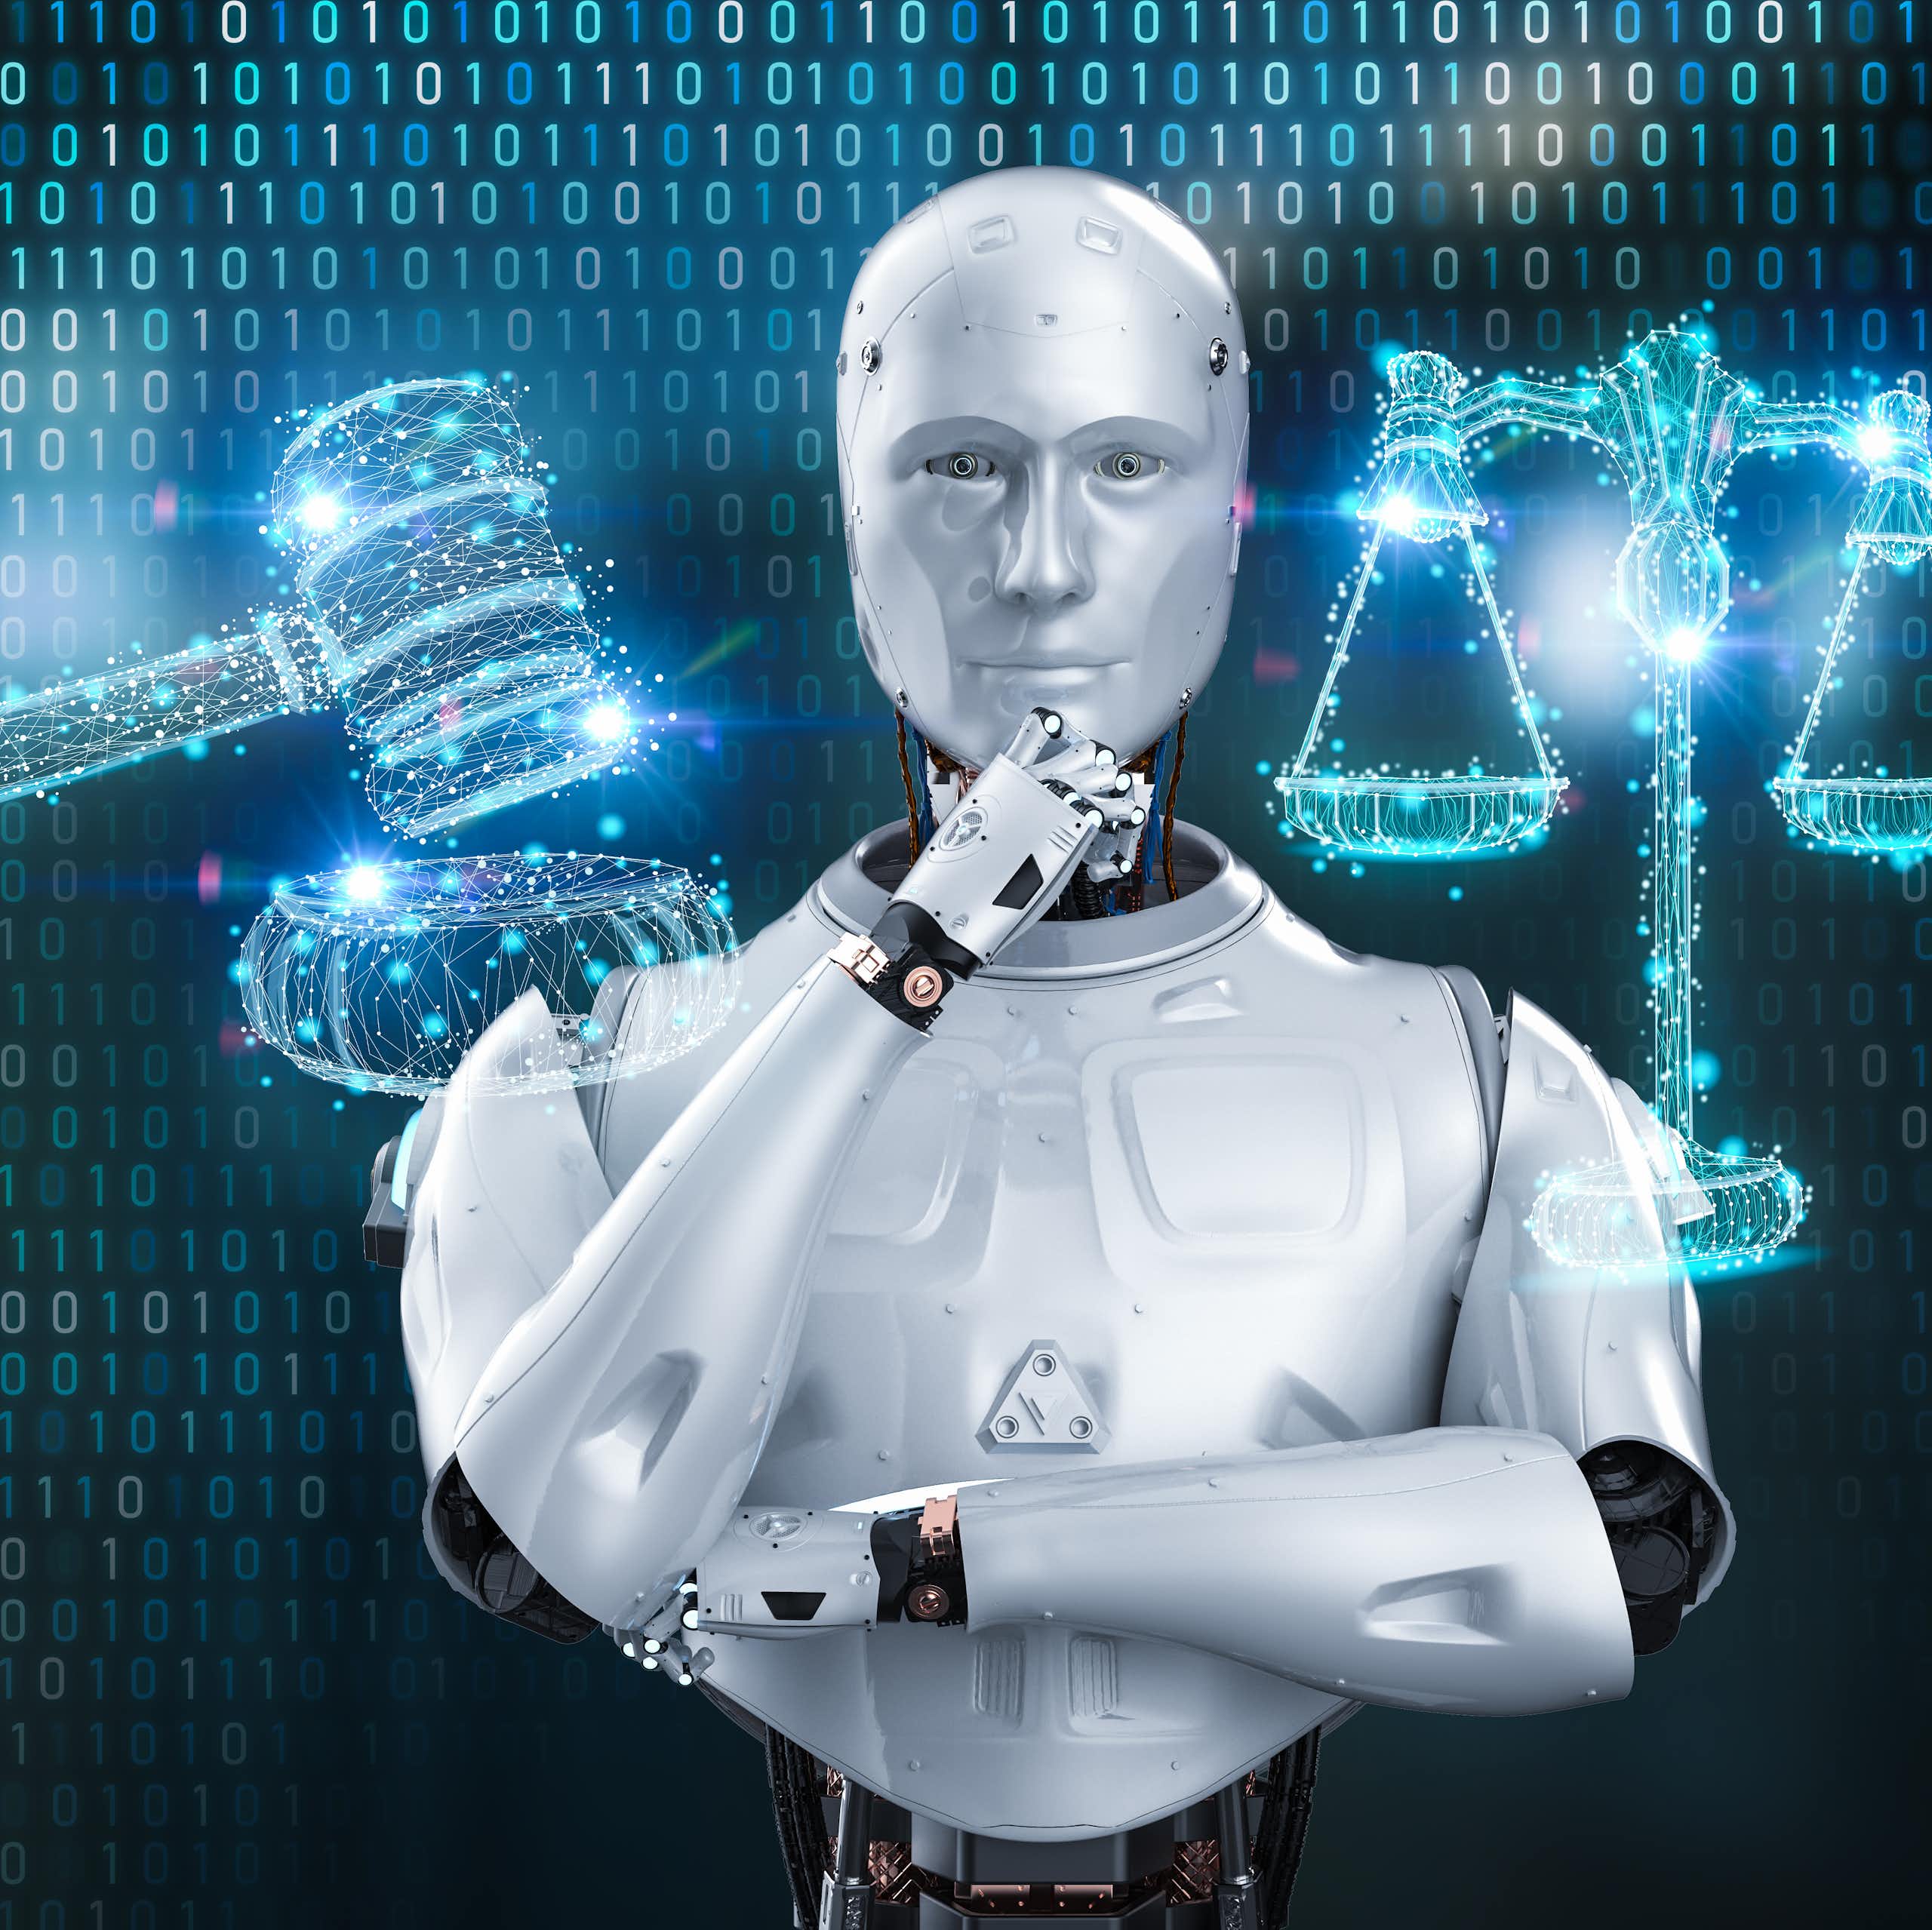 An AI robot has arms folded with a digital image of the scales of justice on one side and a judge's gavel on the other.